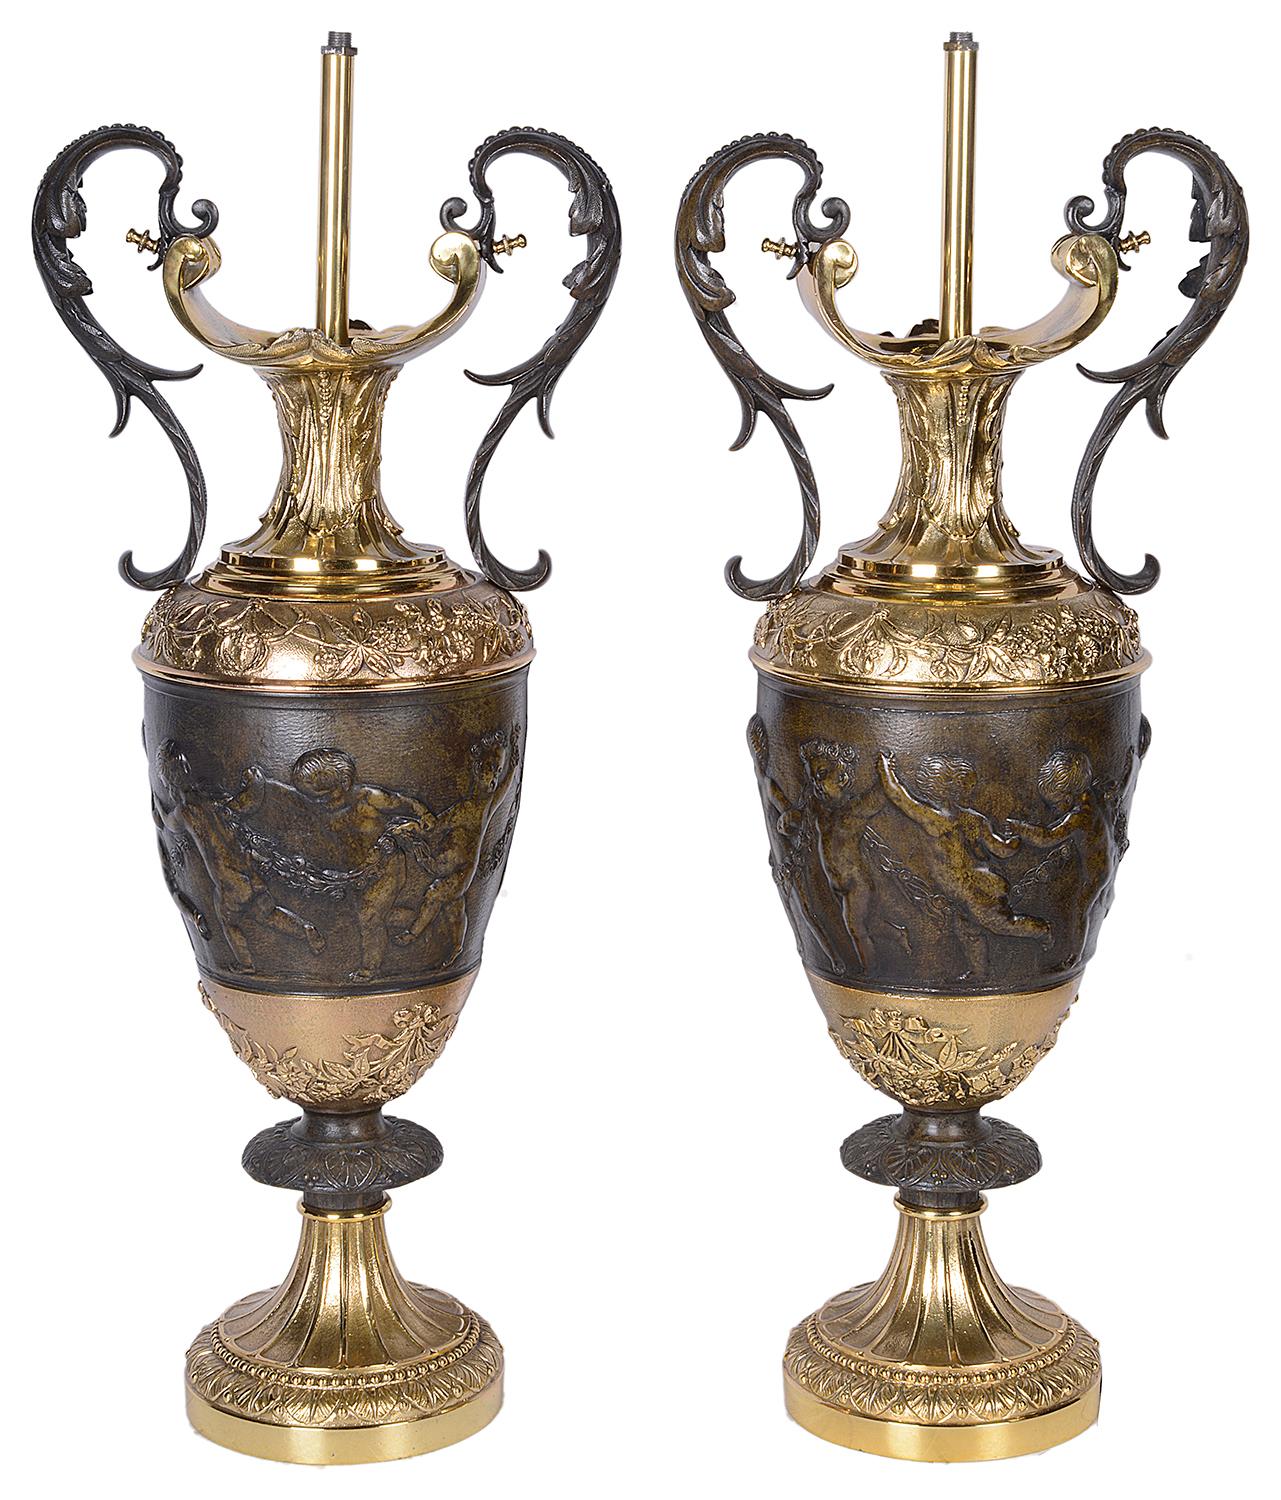 A good quality pair of classical Italian style bronze and gilded ormolu two handle vases / lamps, each having scrolling foliate decoration with dancing cherubs holding hands.